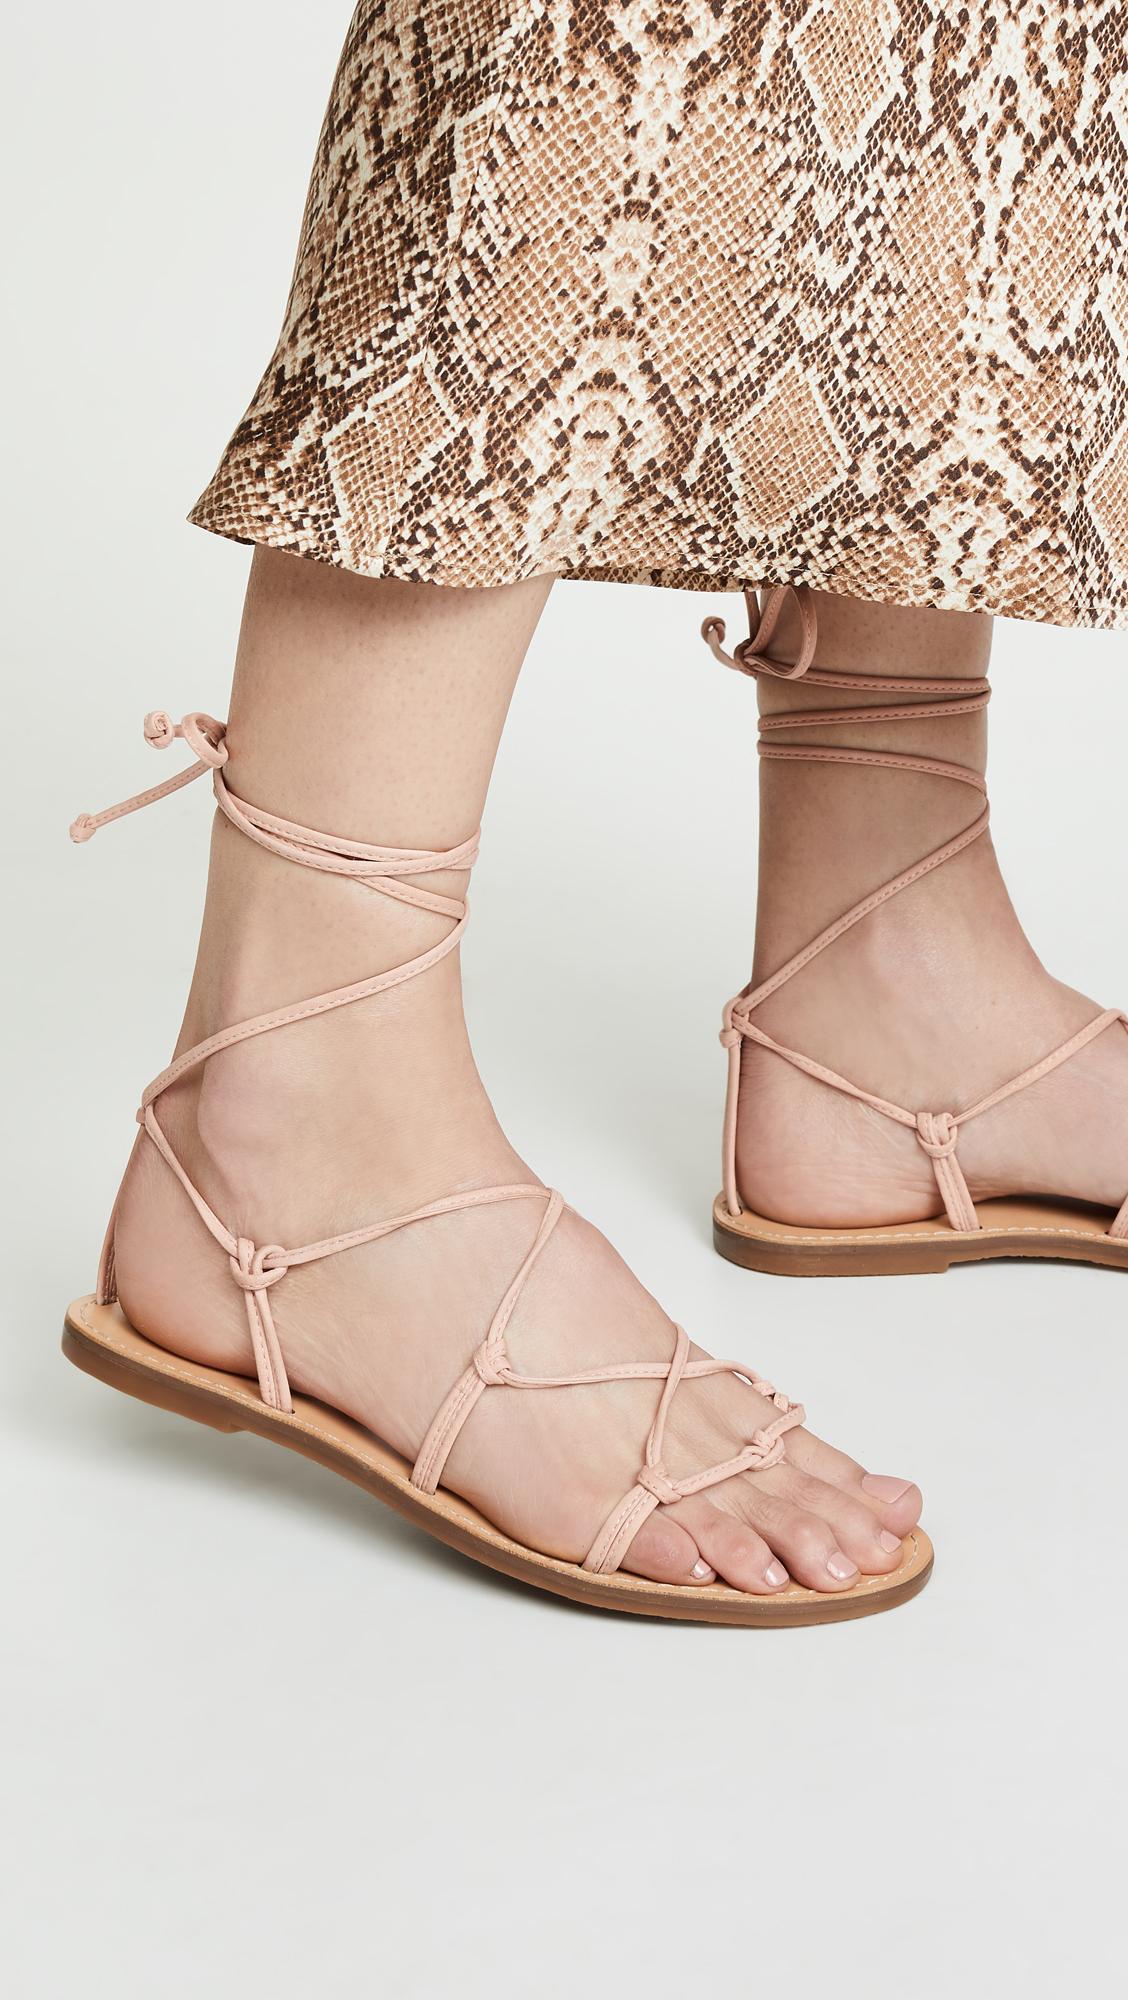 Lyst - Madewell The Boardwalk Lace Up Sandals